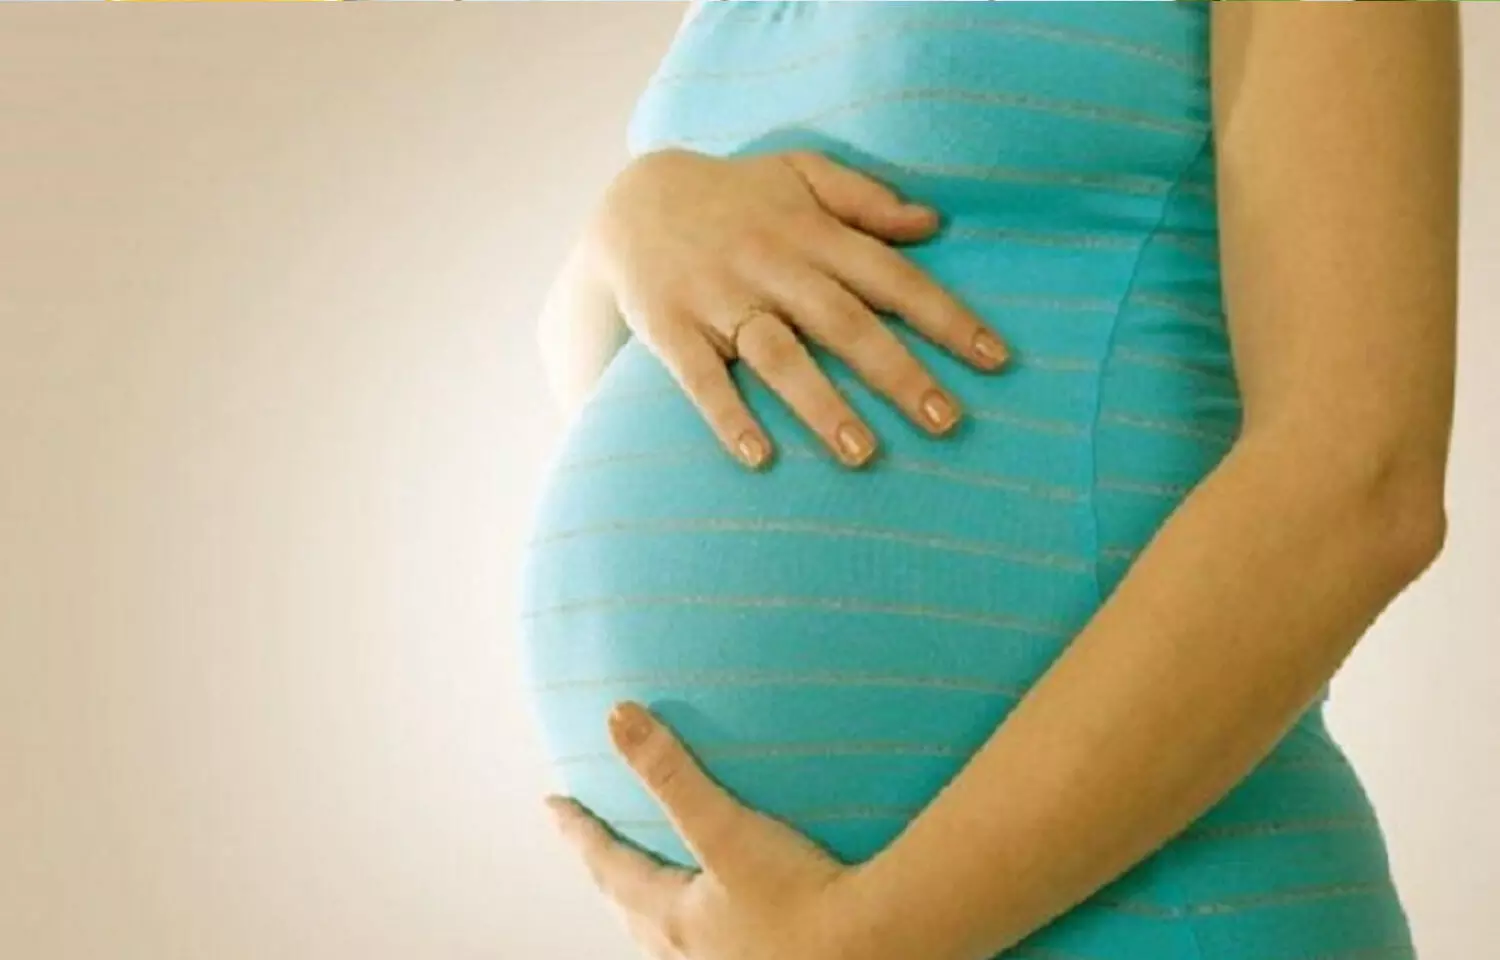 Midwifes failure to read ultrasound scans leads to pregnancy termination, finds Investigation